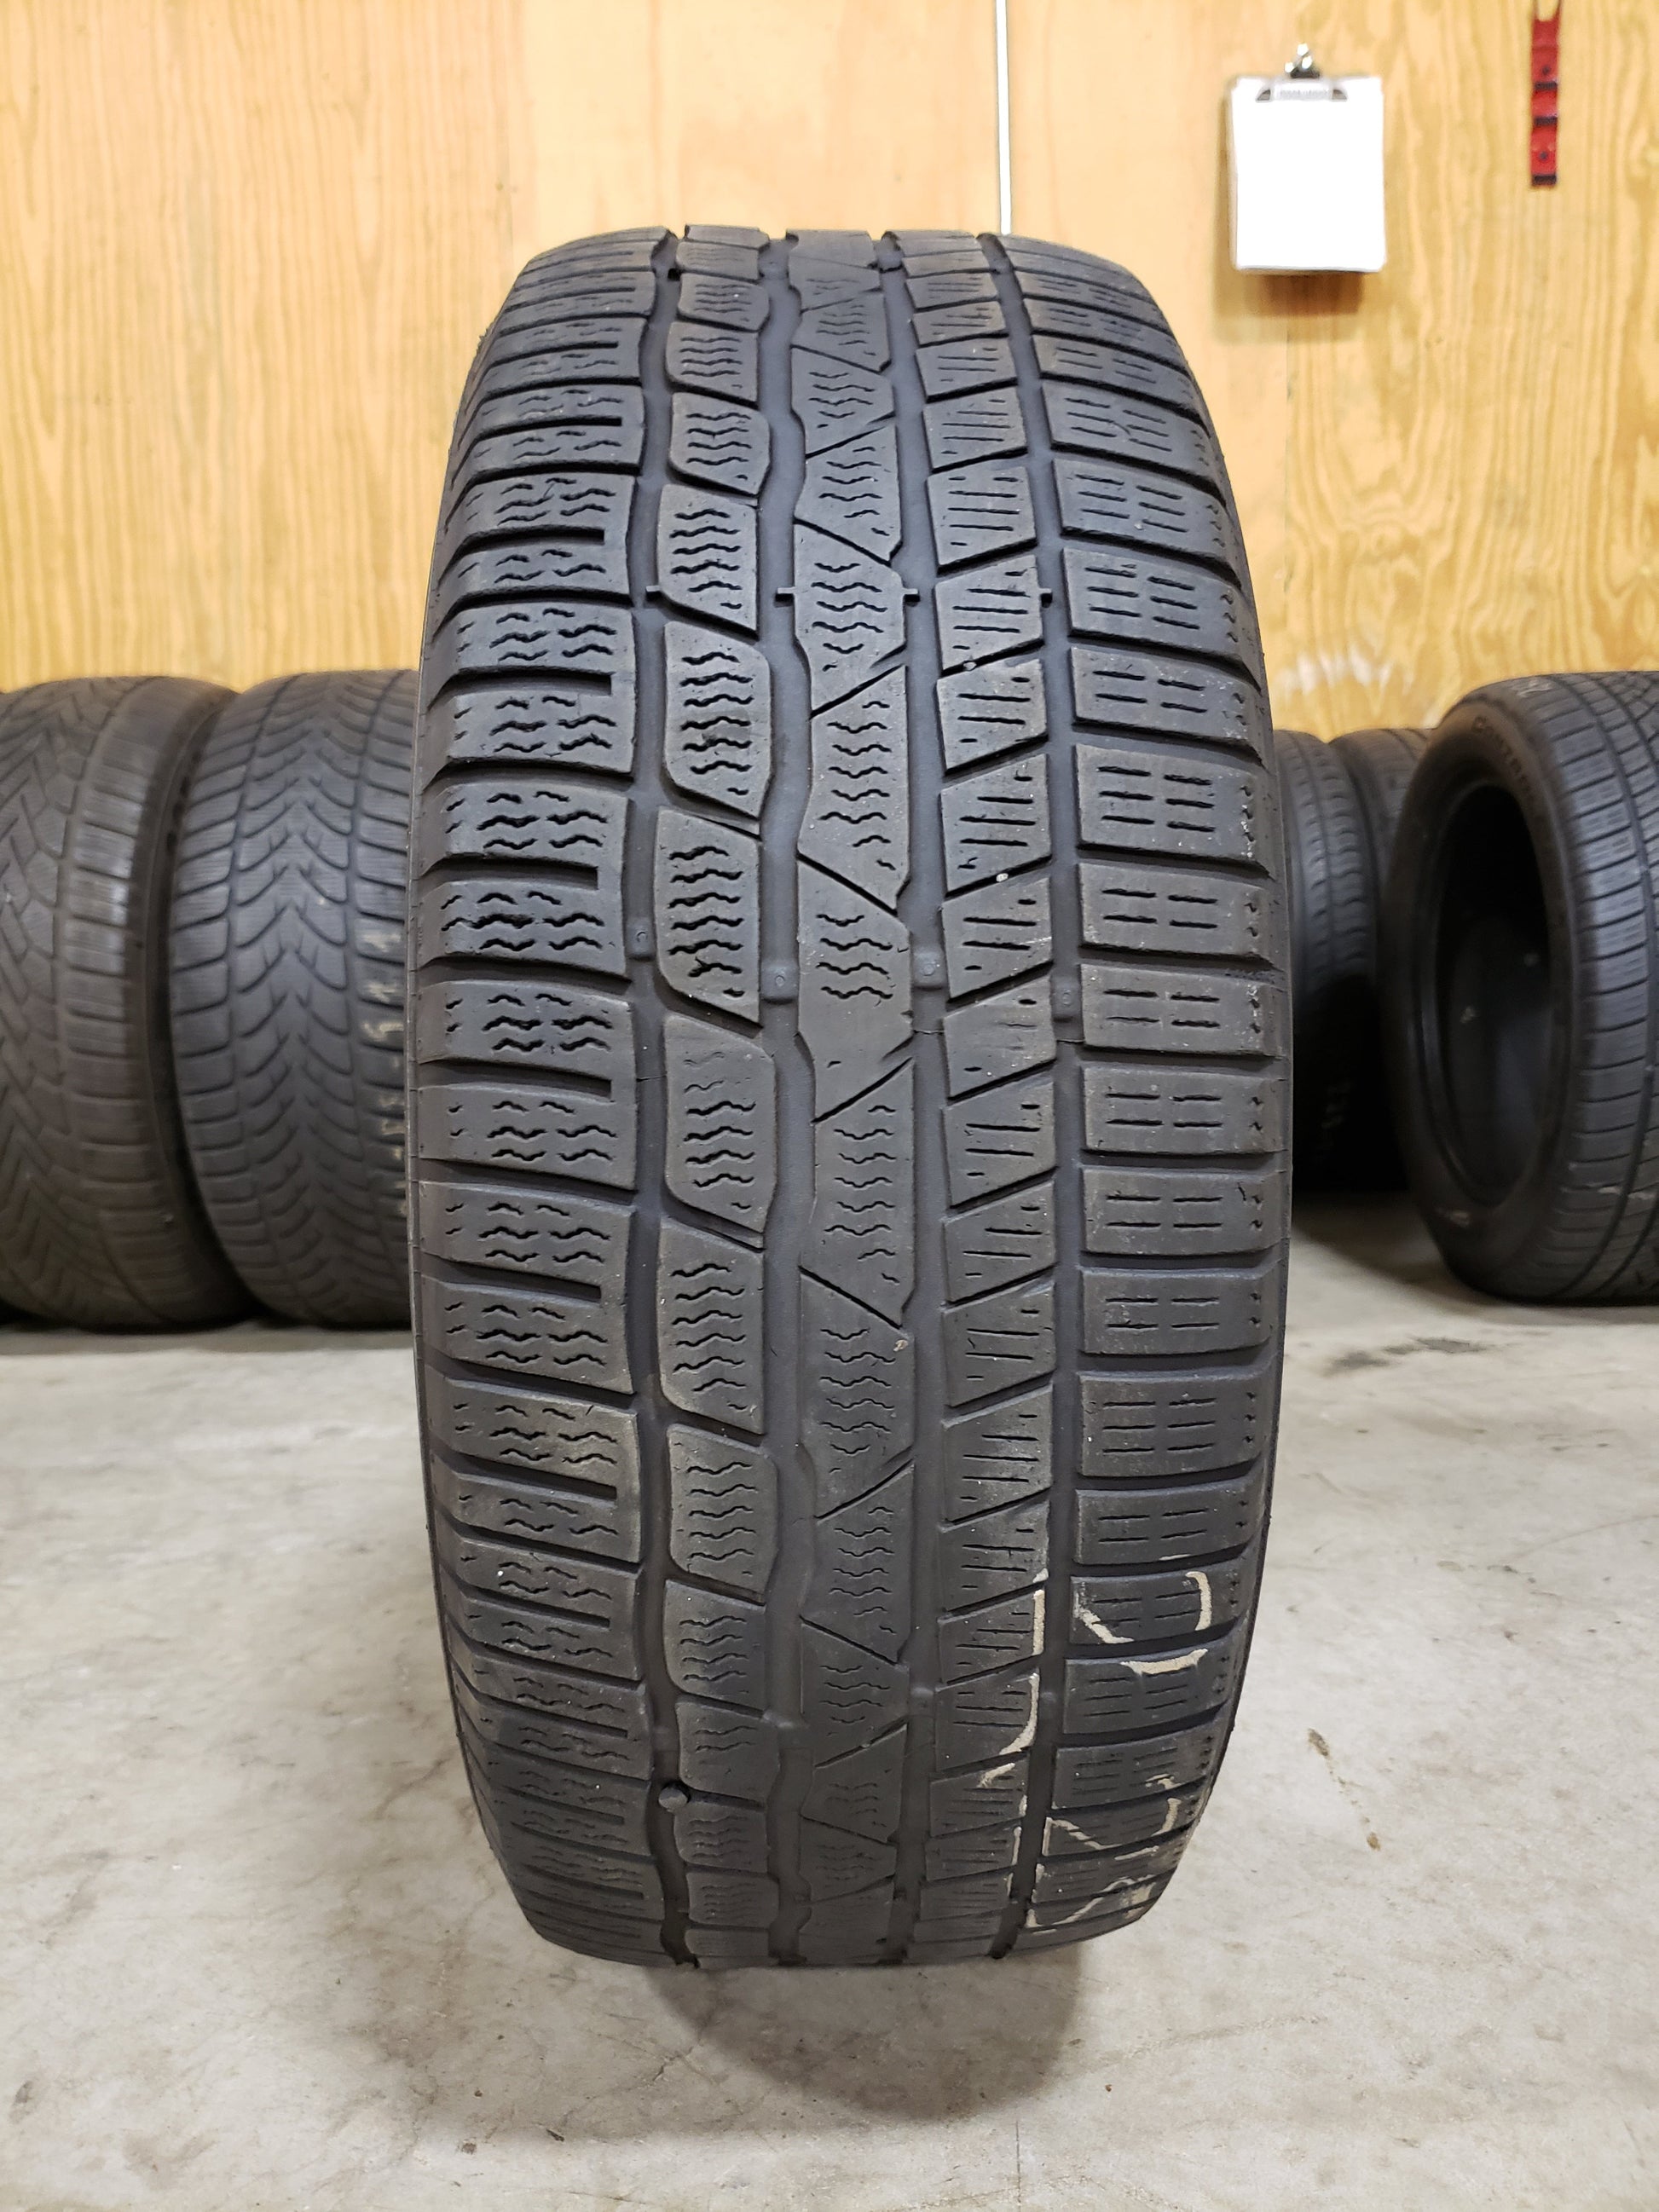 SINGLE 225/55R16 Continental Conti Winter Contact TS830P 99H XL - Used Tires